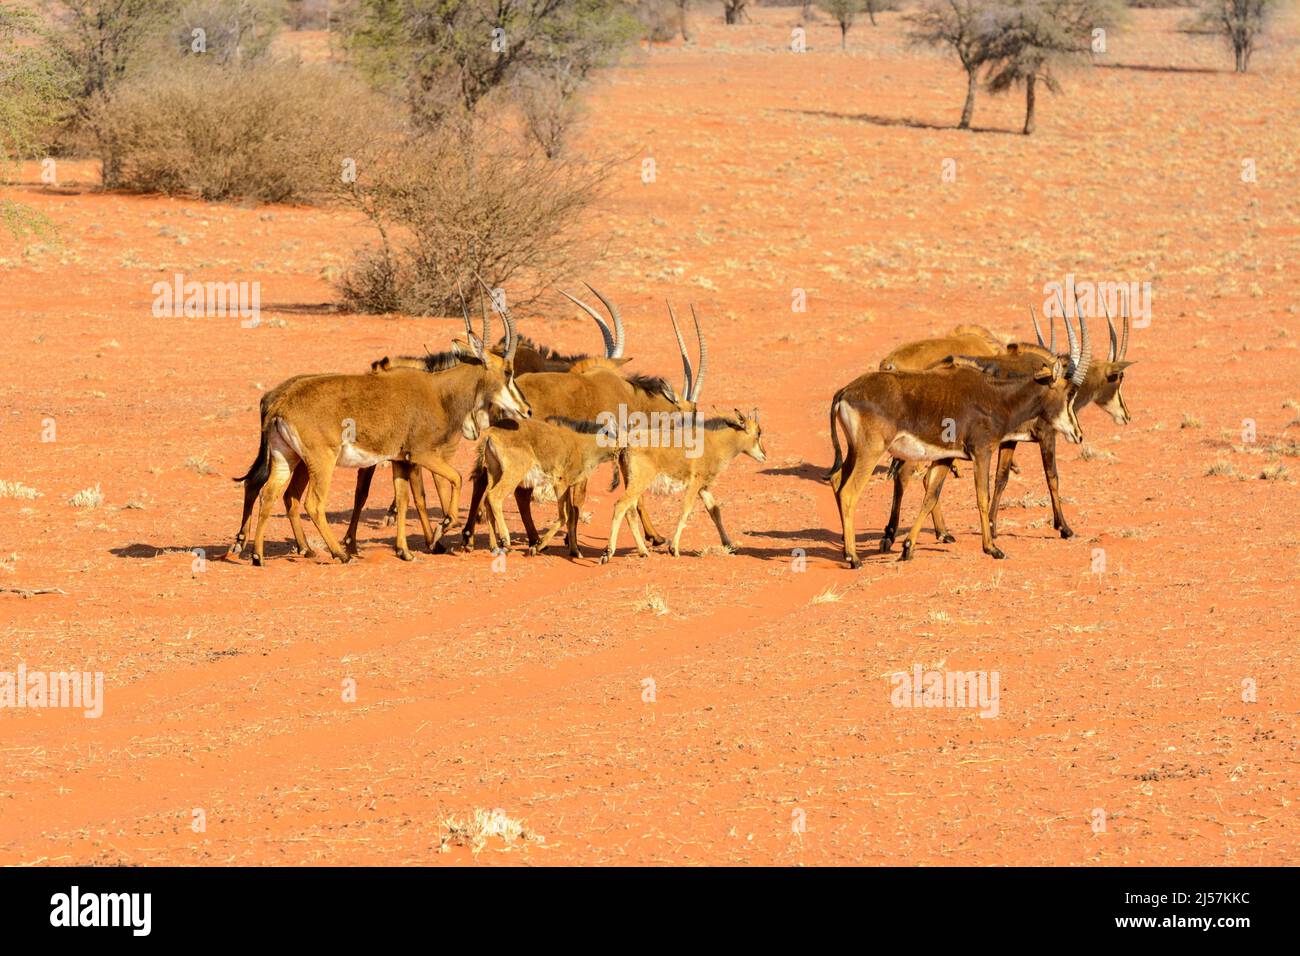 A matriarchal herd of southern sable antelopes (Hippotragus niger niger) walking across the red sand dunes of the Kalahari Desert, Namibia, Africa Stock Photo